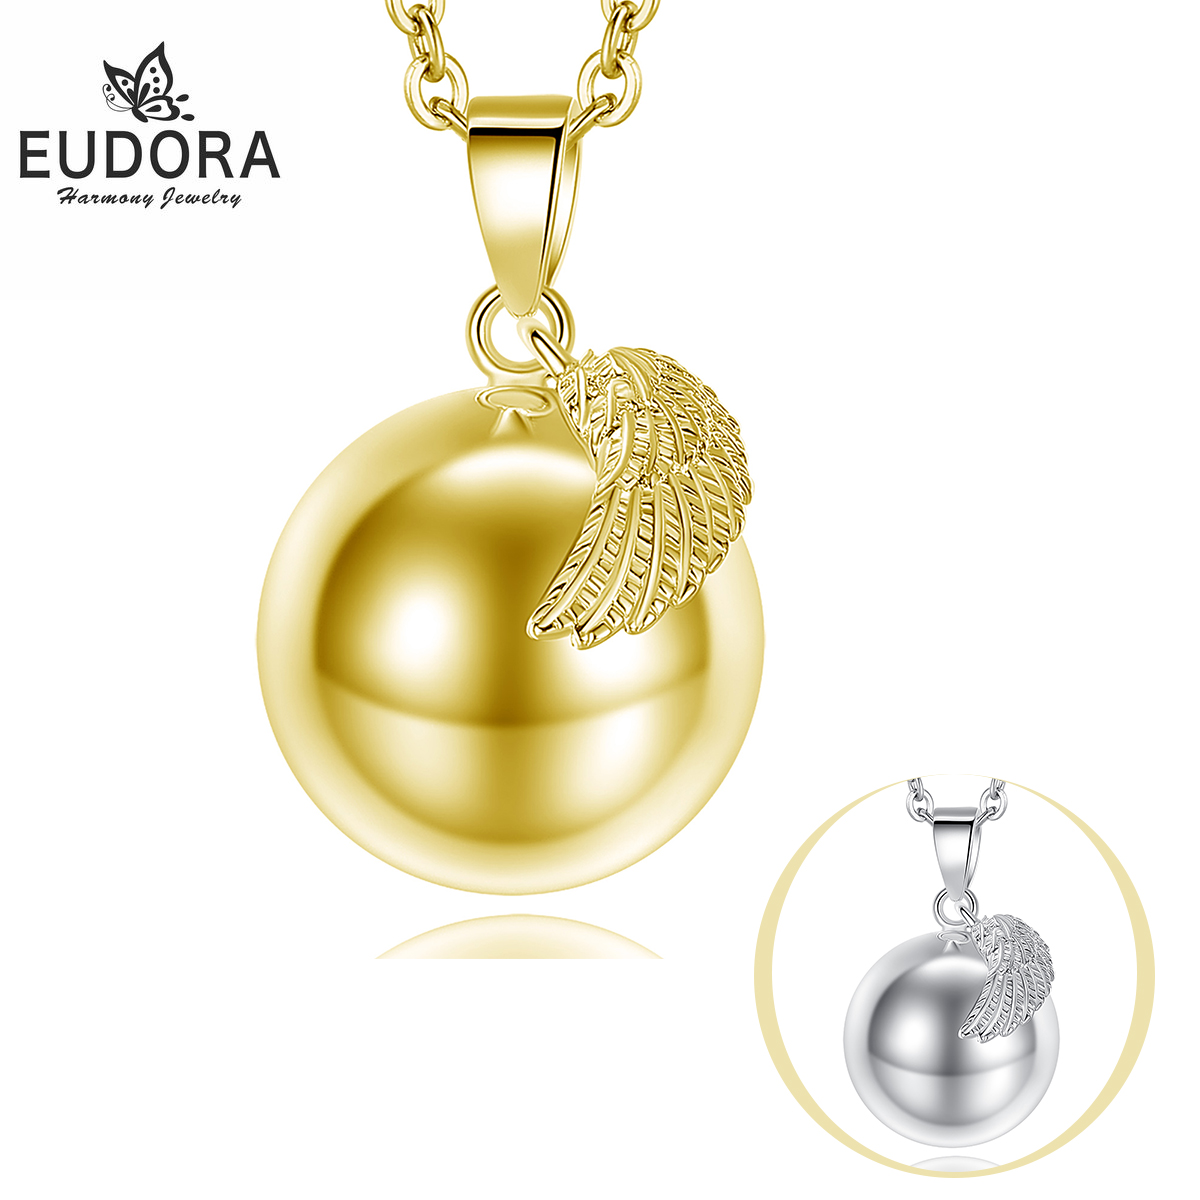 Eudora 20mm Wing Style Mexican Bola Harmony Chime Ball Angel Caller Pregnancy Pendant Necklace for Women Fine Jewelry NB231 1